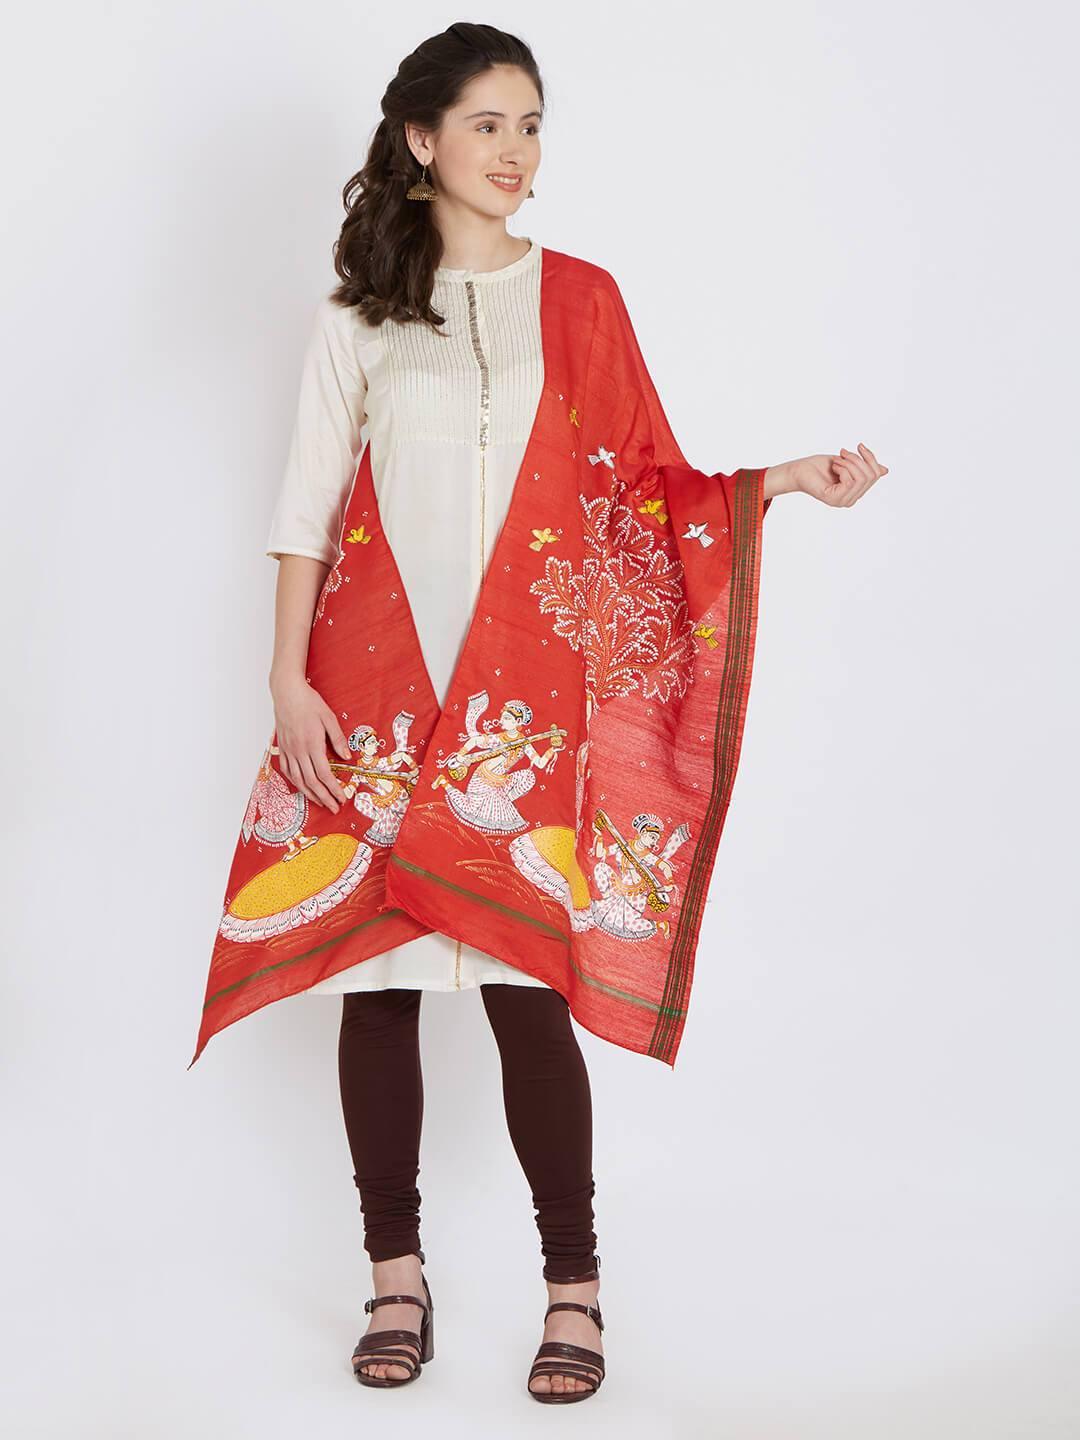 CraftsCollection.in - Red Silk Stole with Pattachitra Motifs